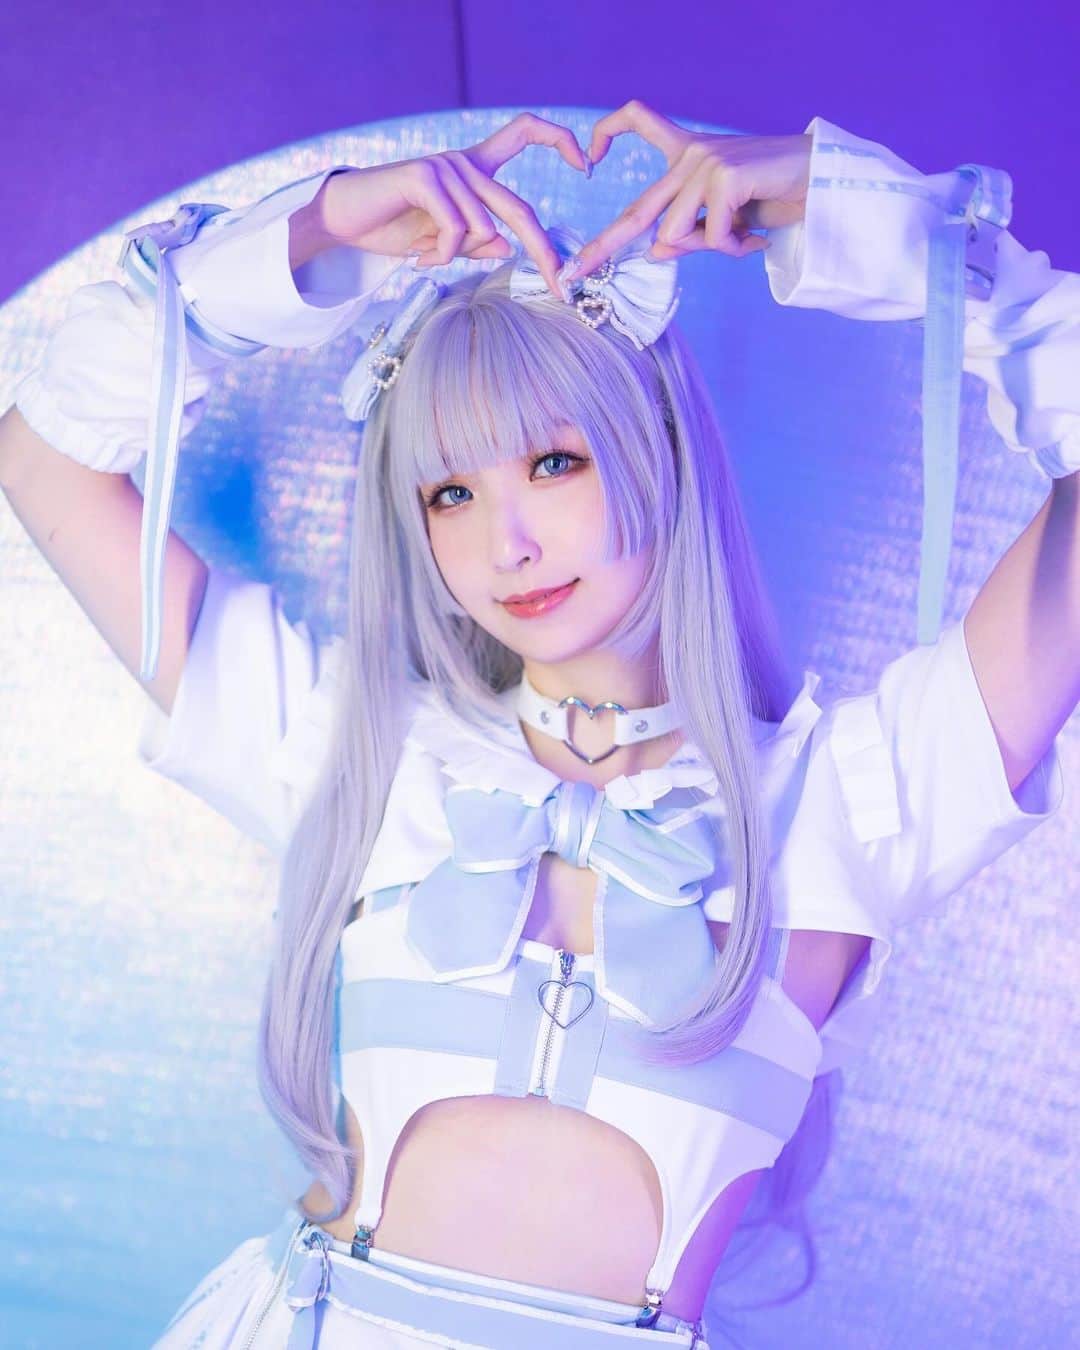 Sherryのインスタグラム：「- December Tier 2 - Bozi soda Silver! (´▽`ʃ♡ƪ)“ ❣️Full set photo ► https://reurl.cc/WEd7Rk  波子汽水銀登場!! (　ﾟ∀ﾟ) ﾉ♡ 甜甜的~ 清爽的~ 您一定會喜歡的♡♡  這麼快就到12月了!!! 感覺這一年真的過得好快.. 大家的桌曆是不是都翻到最後一頁了? 那就要一起迎接新的一年了(♡˙︶˙♡) 今個月訂閱Tier 4的話就能獲得2024的銀曆~ (是正常版的!) 喜歡的話要把我帶回家喔ε٩(๑> ₃ <)۶з  Bozi Soda Silver is here!! Sweet~ Refreshing~ You will definitely like it♡♡  It’s December so soon!!! It feels like this year has really gone by so fast.. Have everyone’s desk calendars been turned to the last page? Let’s welcome the new year together (♡˙︶˙♡) You will get the 2024 Silver Calendar if you subscribe to Tier 4 this month~ Just take me home if you like it! ε٩(๑> ₃ <)۶з  #cosplay#cosplayer #cosplaygirl #photo #cosplayphoto #cosplayersofinstagram #cosplayphotography #anime #silverxherecosplay #patreoncreator #patreonartist  #コスプレ　#コスプレイヤー　#コスプレイヤーさんと繋がりたい　#コスプレ写真」